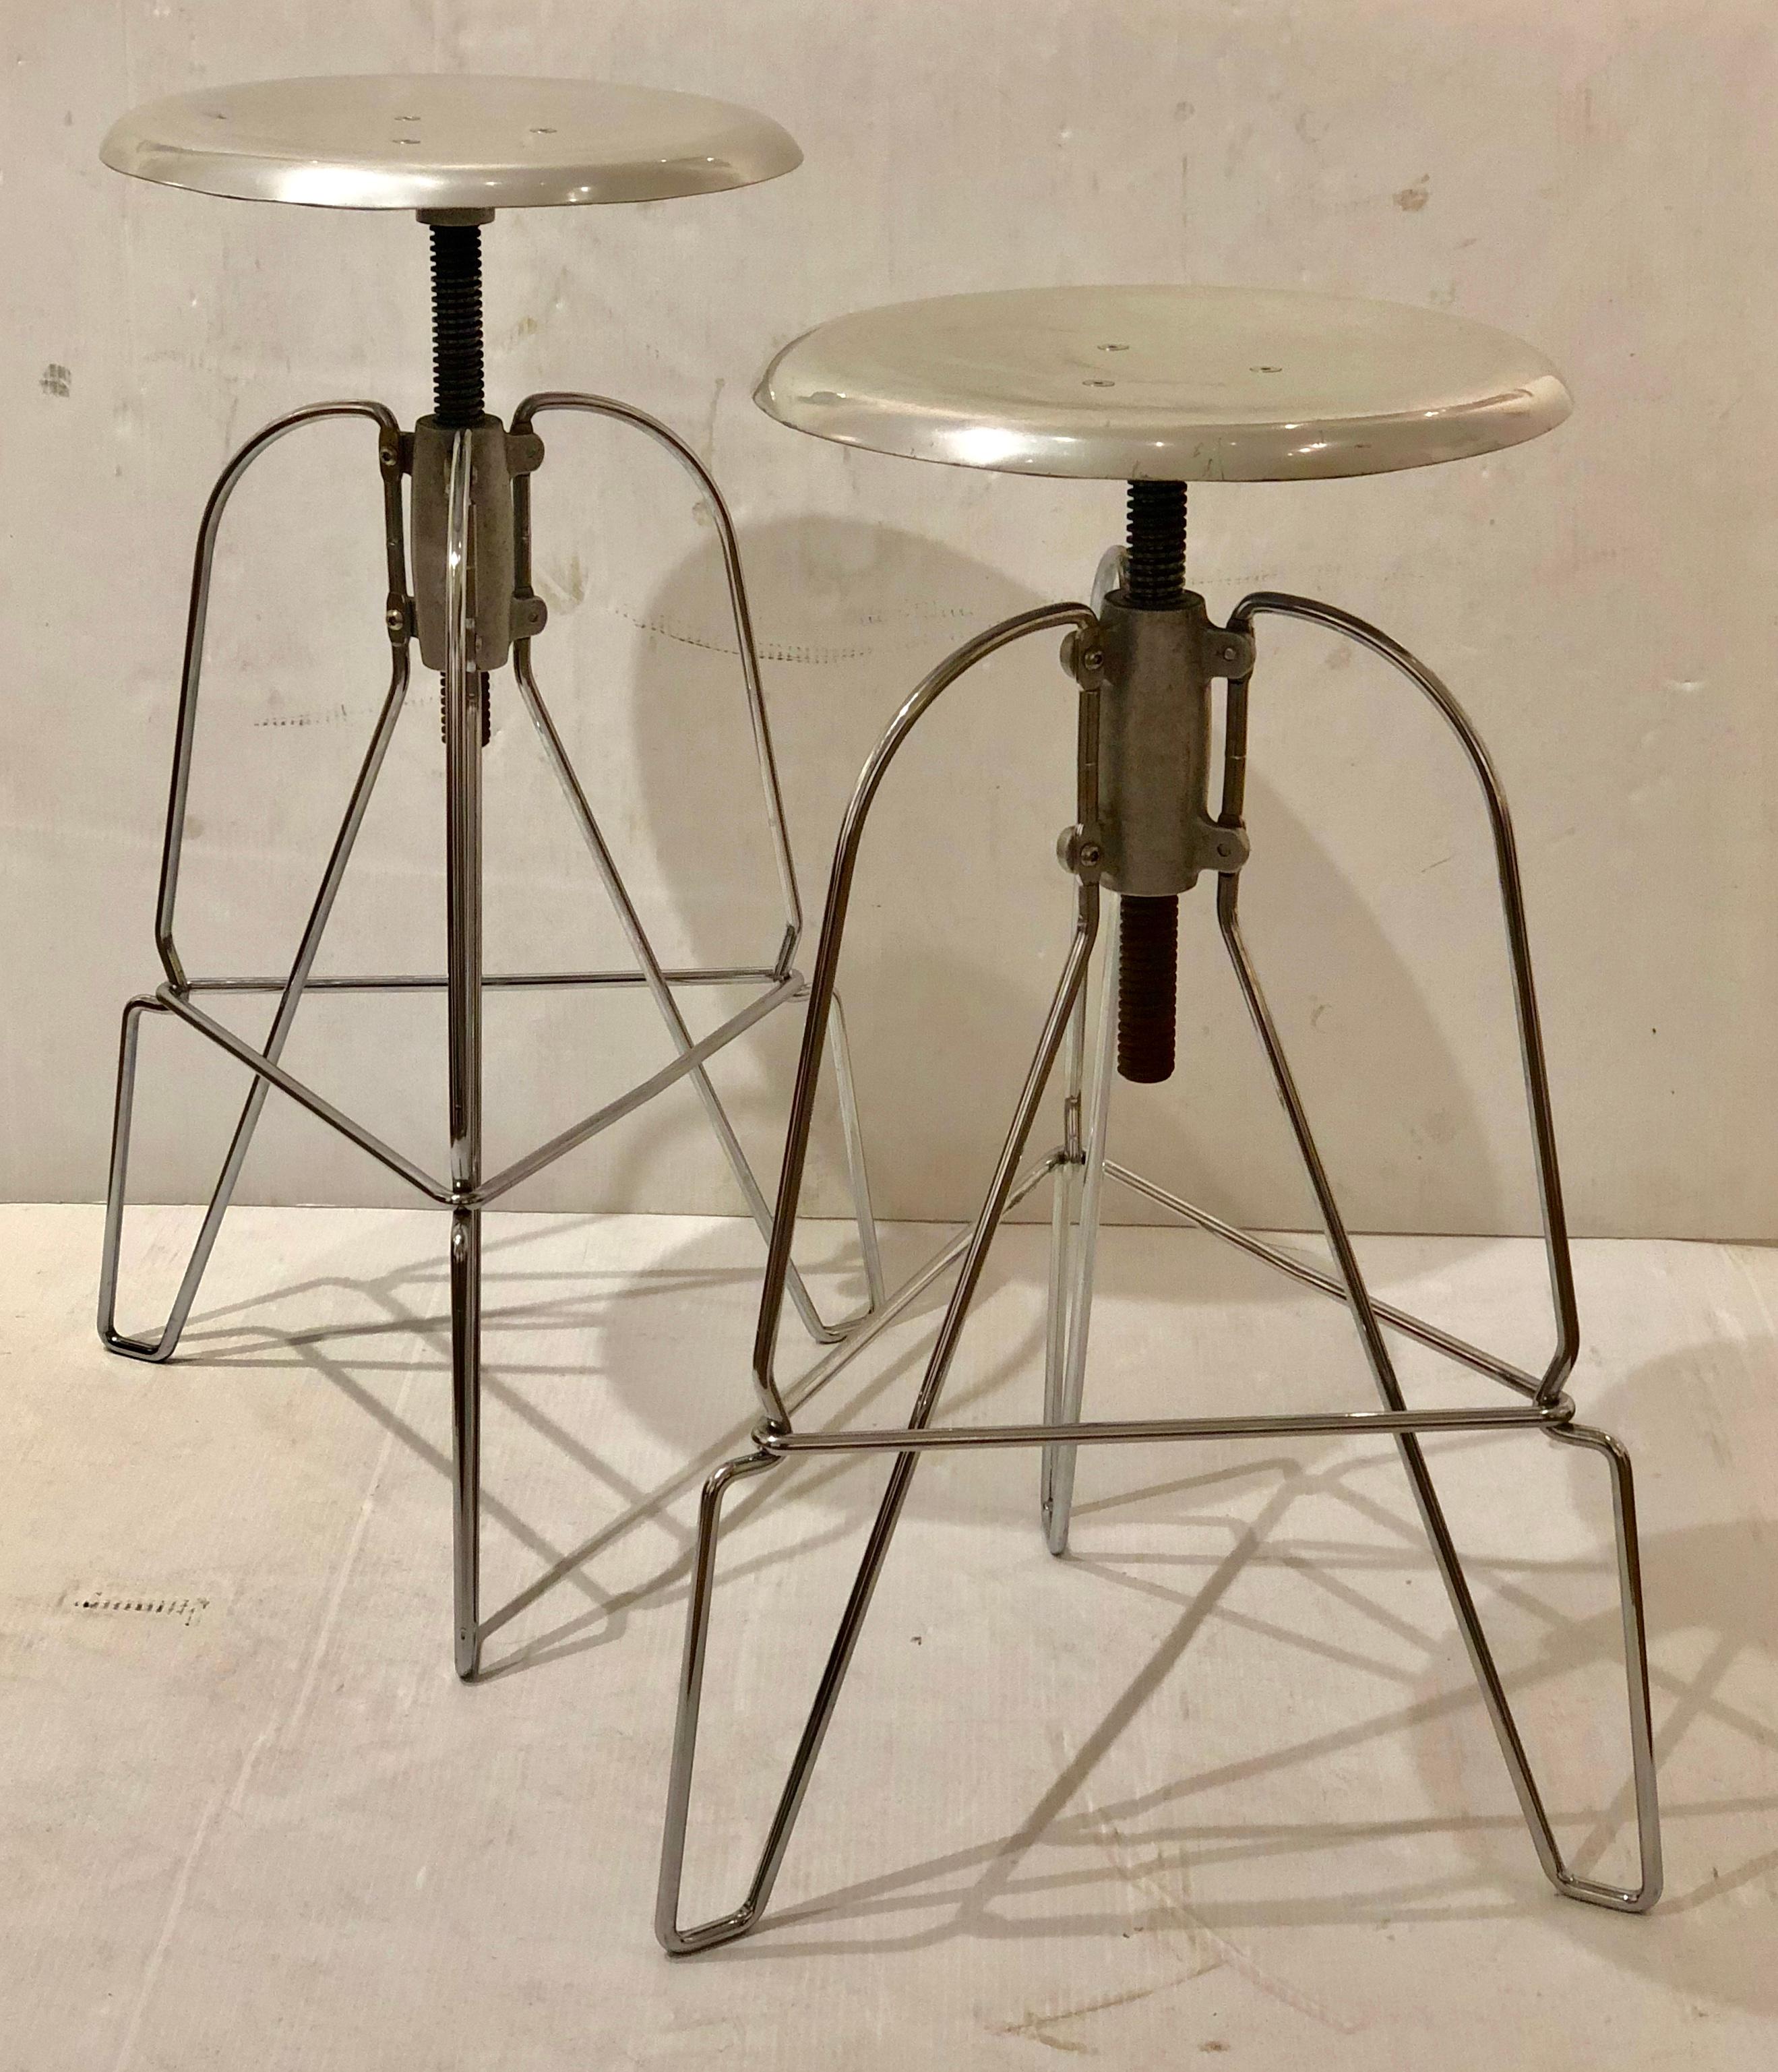 Pair of Jeff Covey for Herman Miller model 6 stools. The legs are steel on chrome with aluminum swivel seat. The height is adjustable 25-32. This are early edition one of the seats shows more wear and a couple of dings do to age and use these set